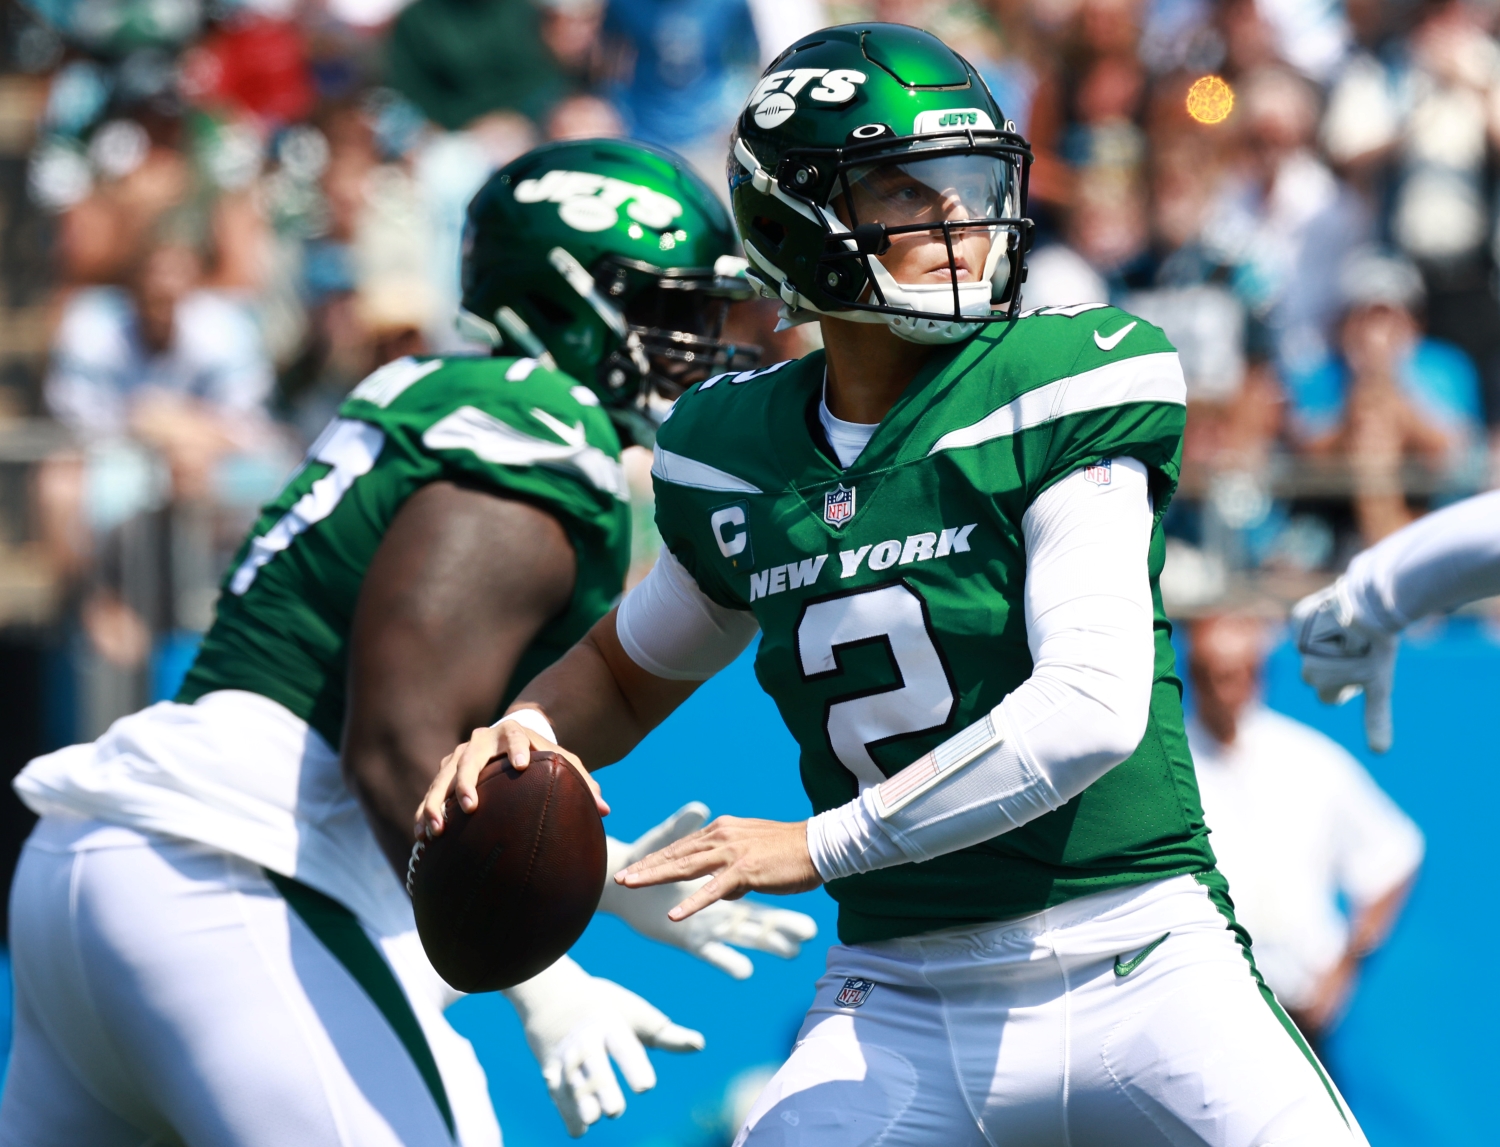 New York Jets quarterback Zach Wilson gets ready to throw a pass against the Carolina Panthers.